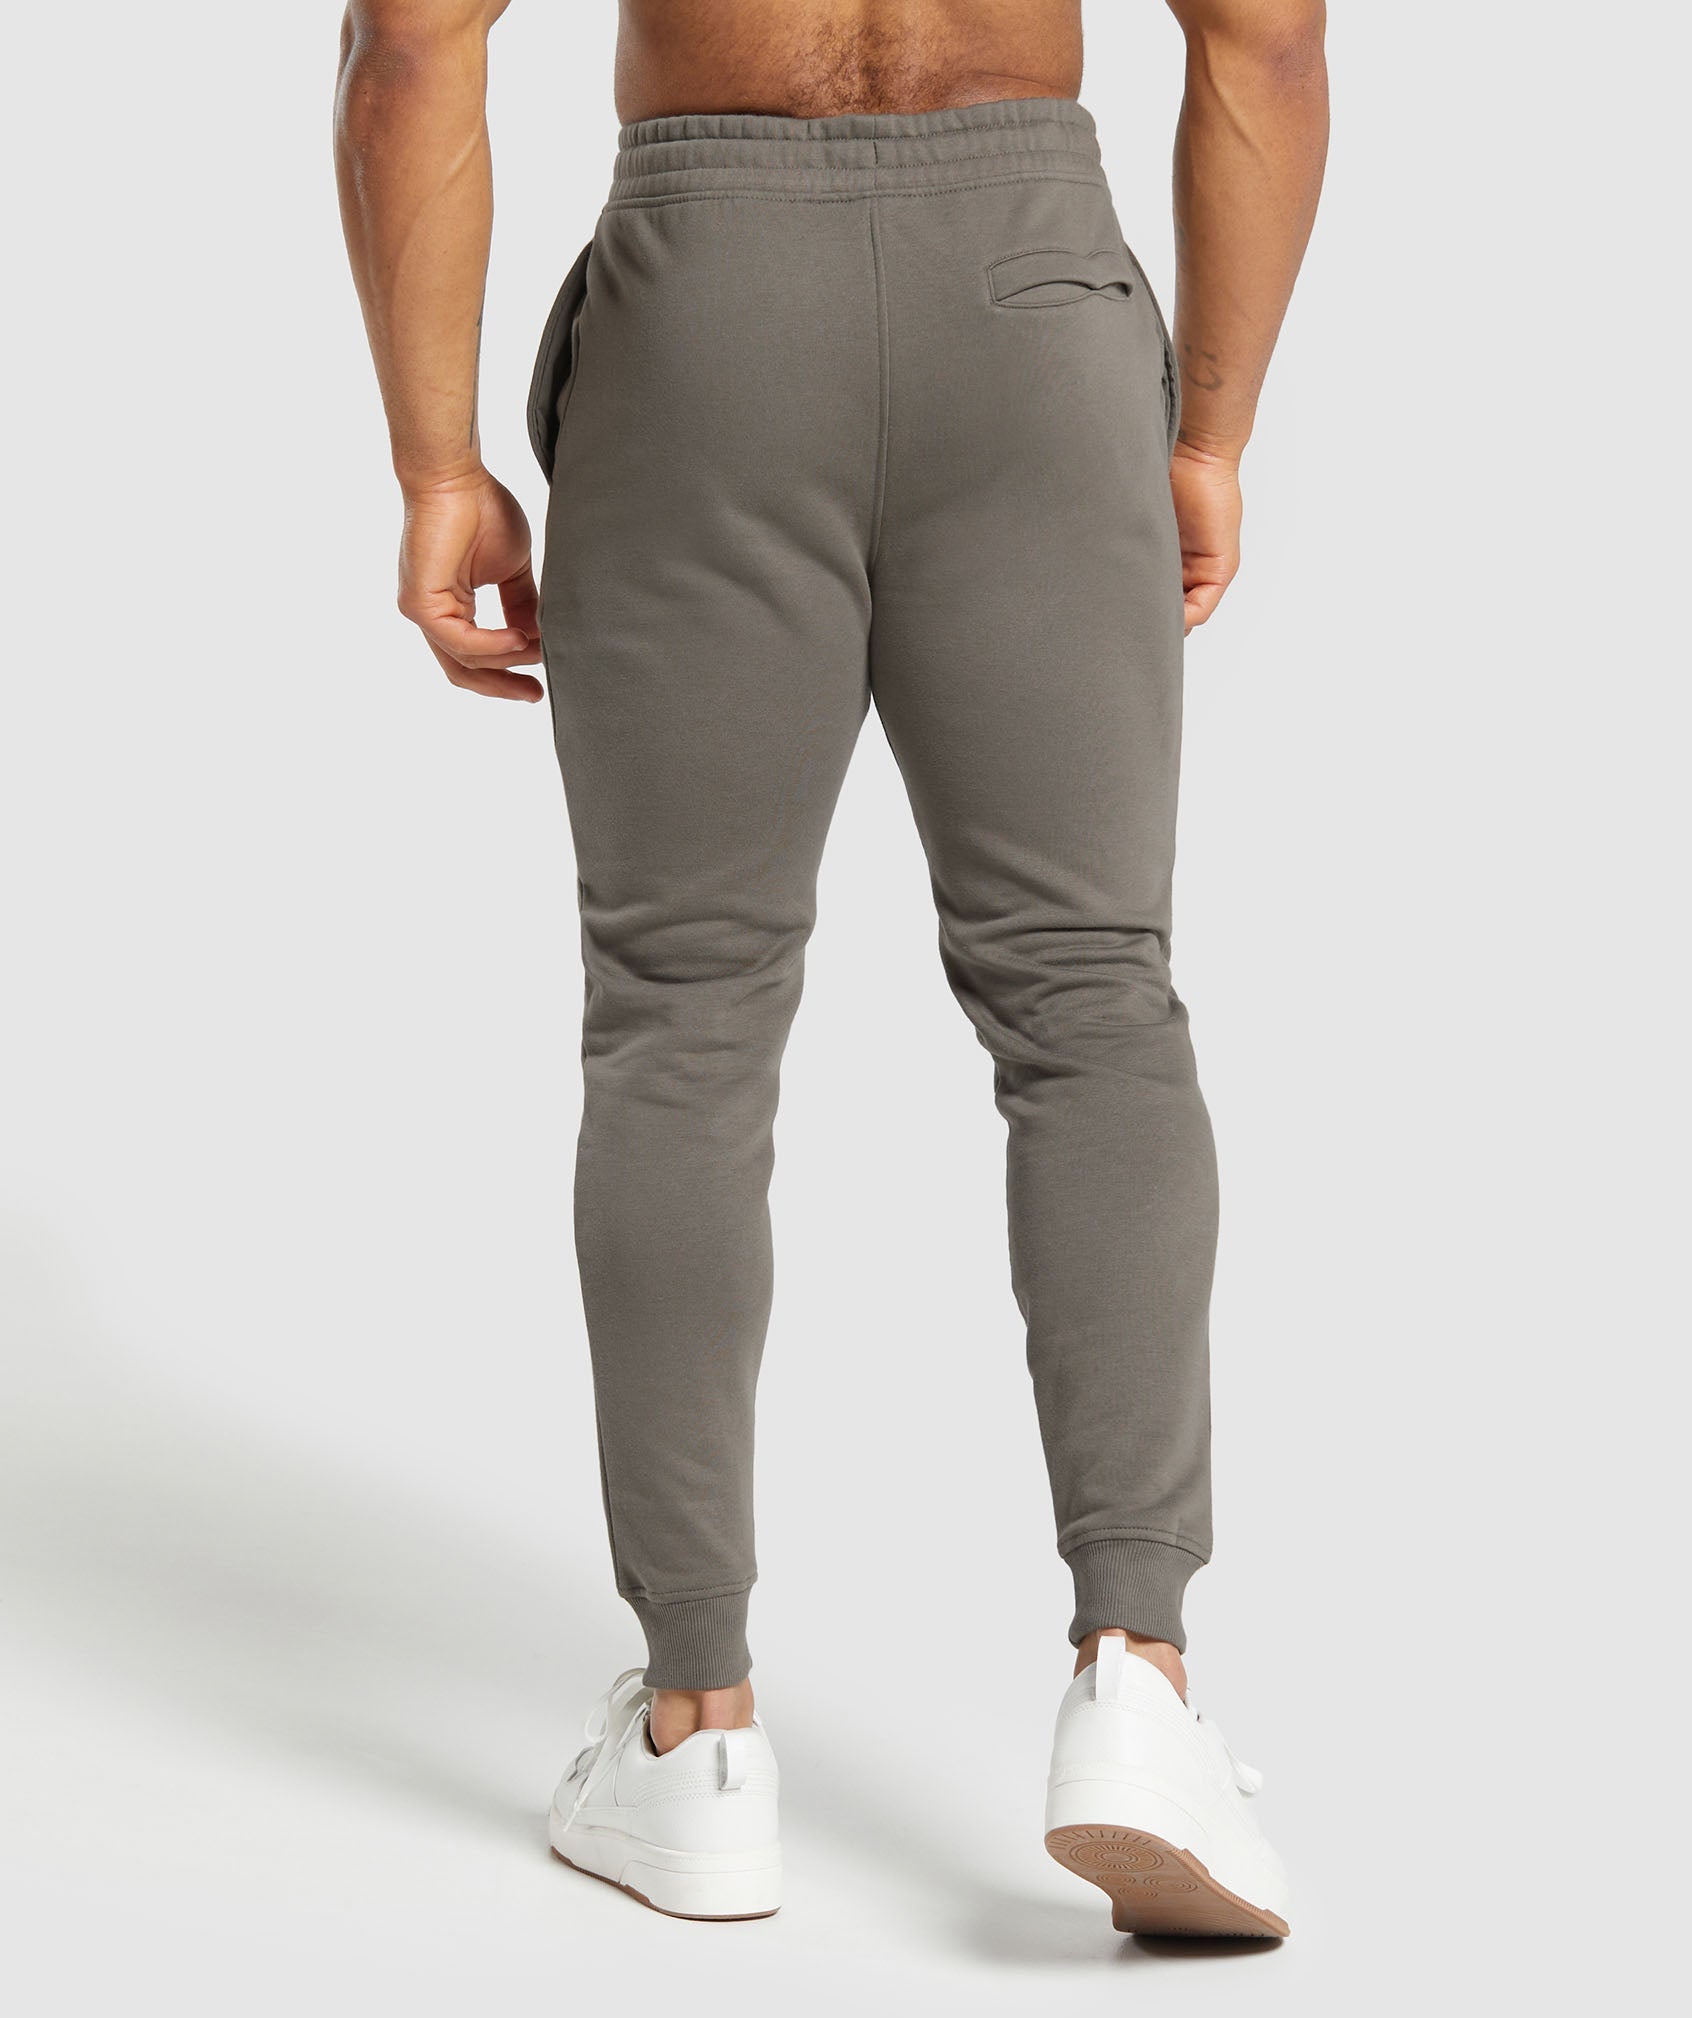 Crest Joggers in Camo Brown - view 2